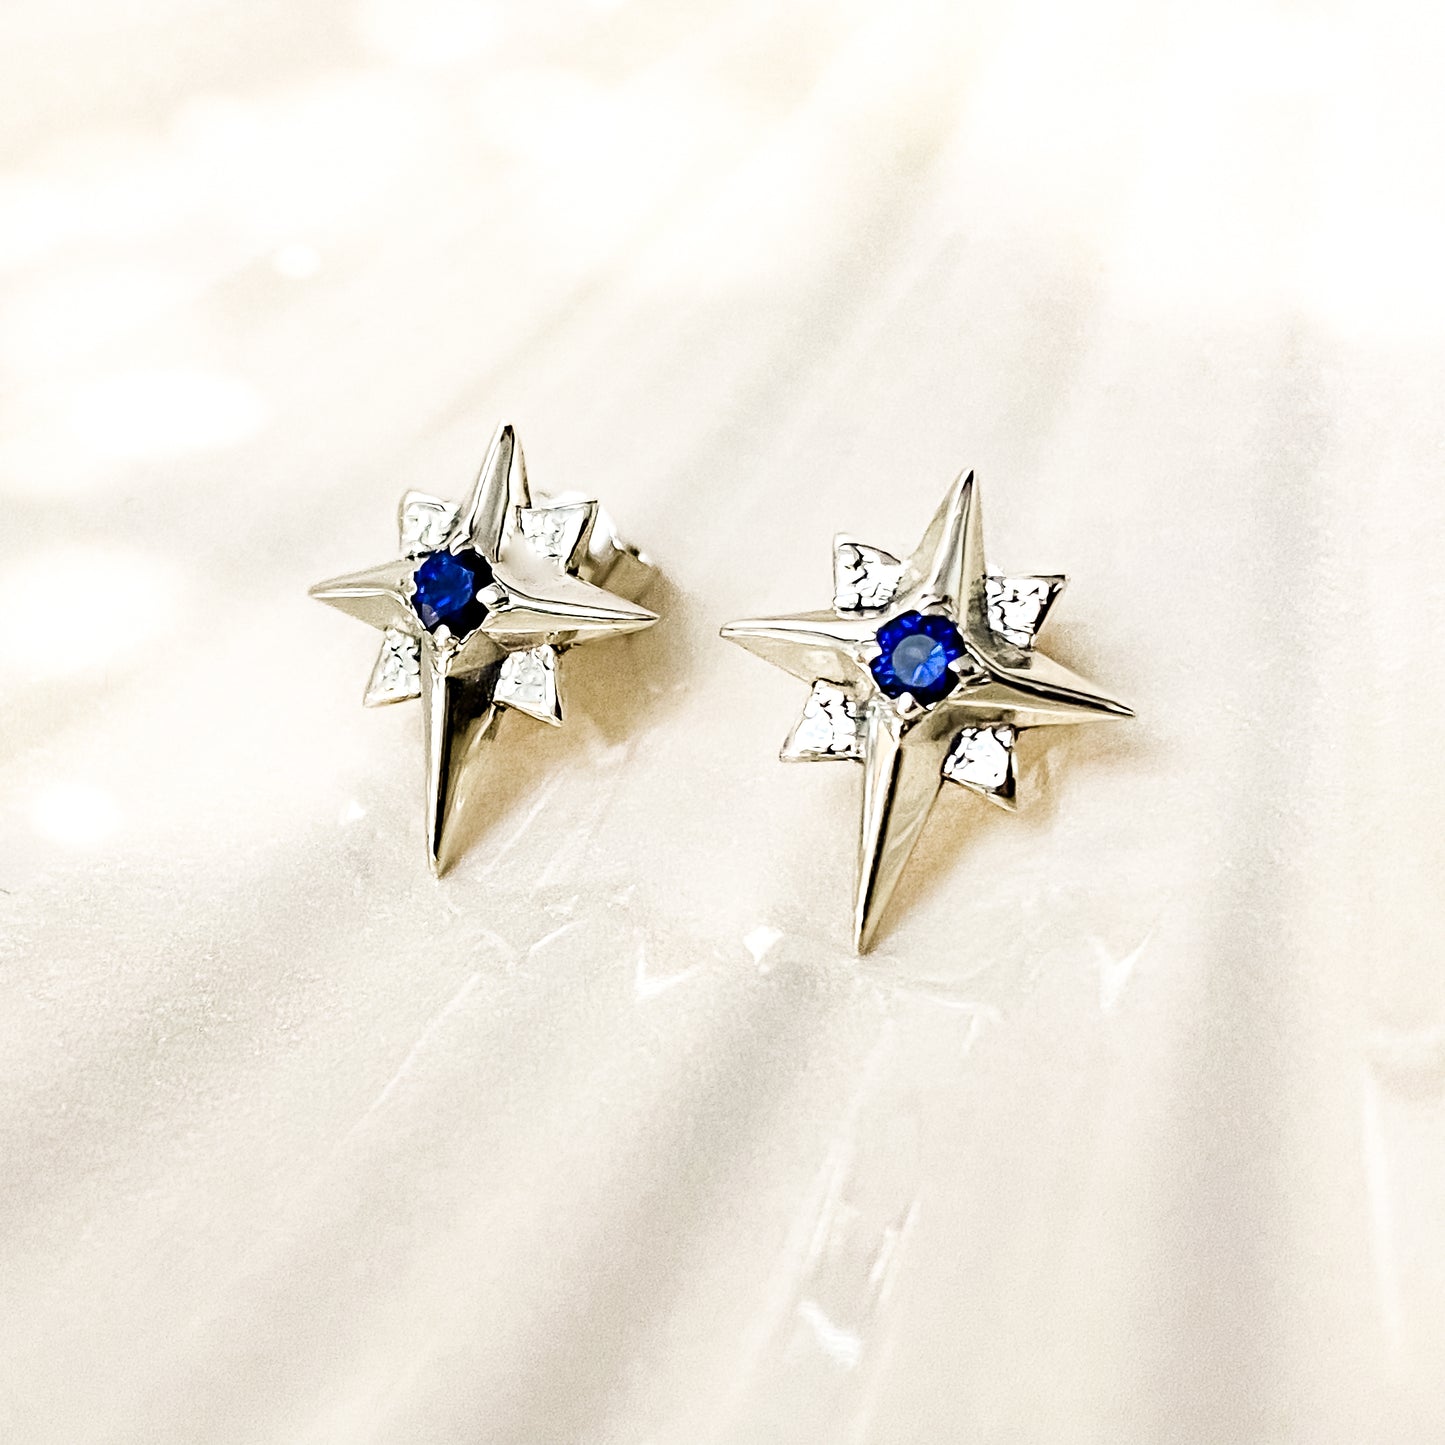 North Star White Gold Large Stud Earrings with Sapphire